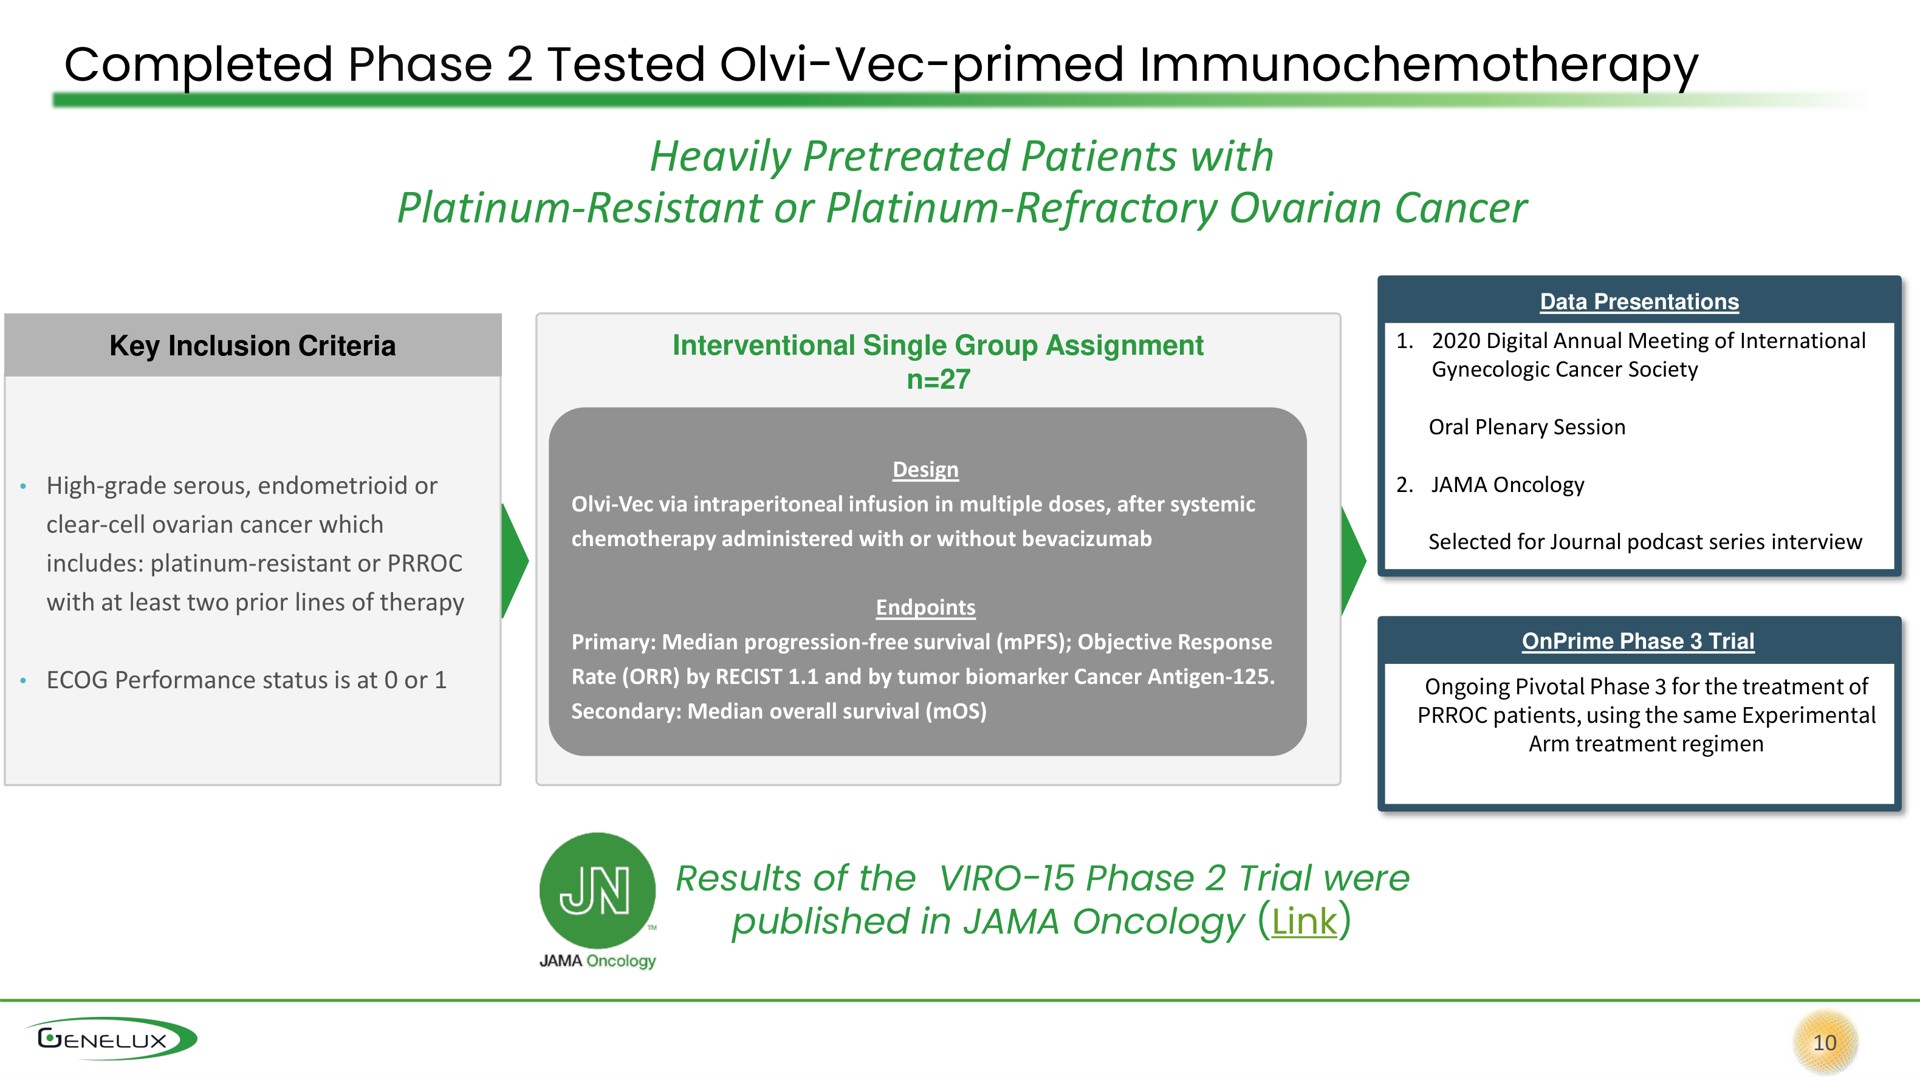 completed phase tested primed heavily patients with platinum resistant or platinum refractory ovarian cancer published in jama oncology link | Genelux